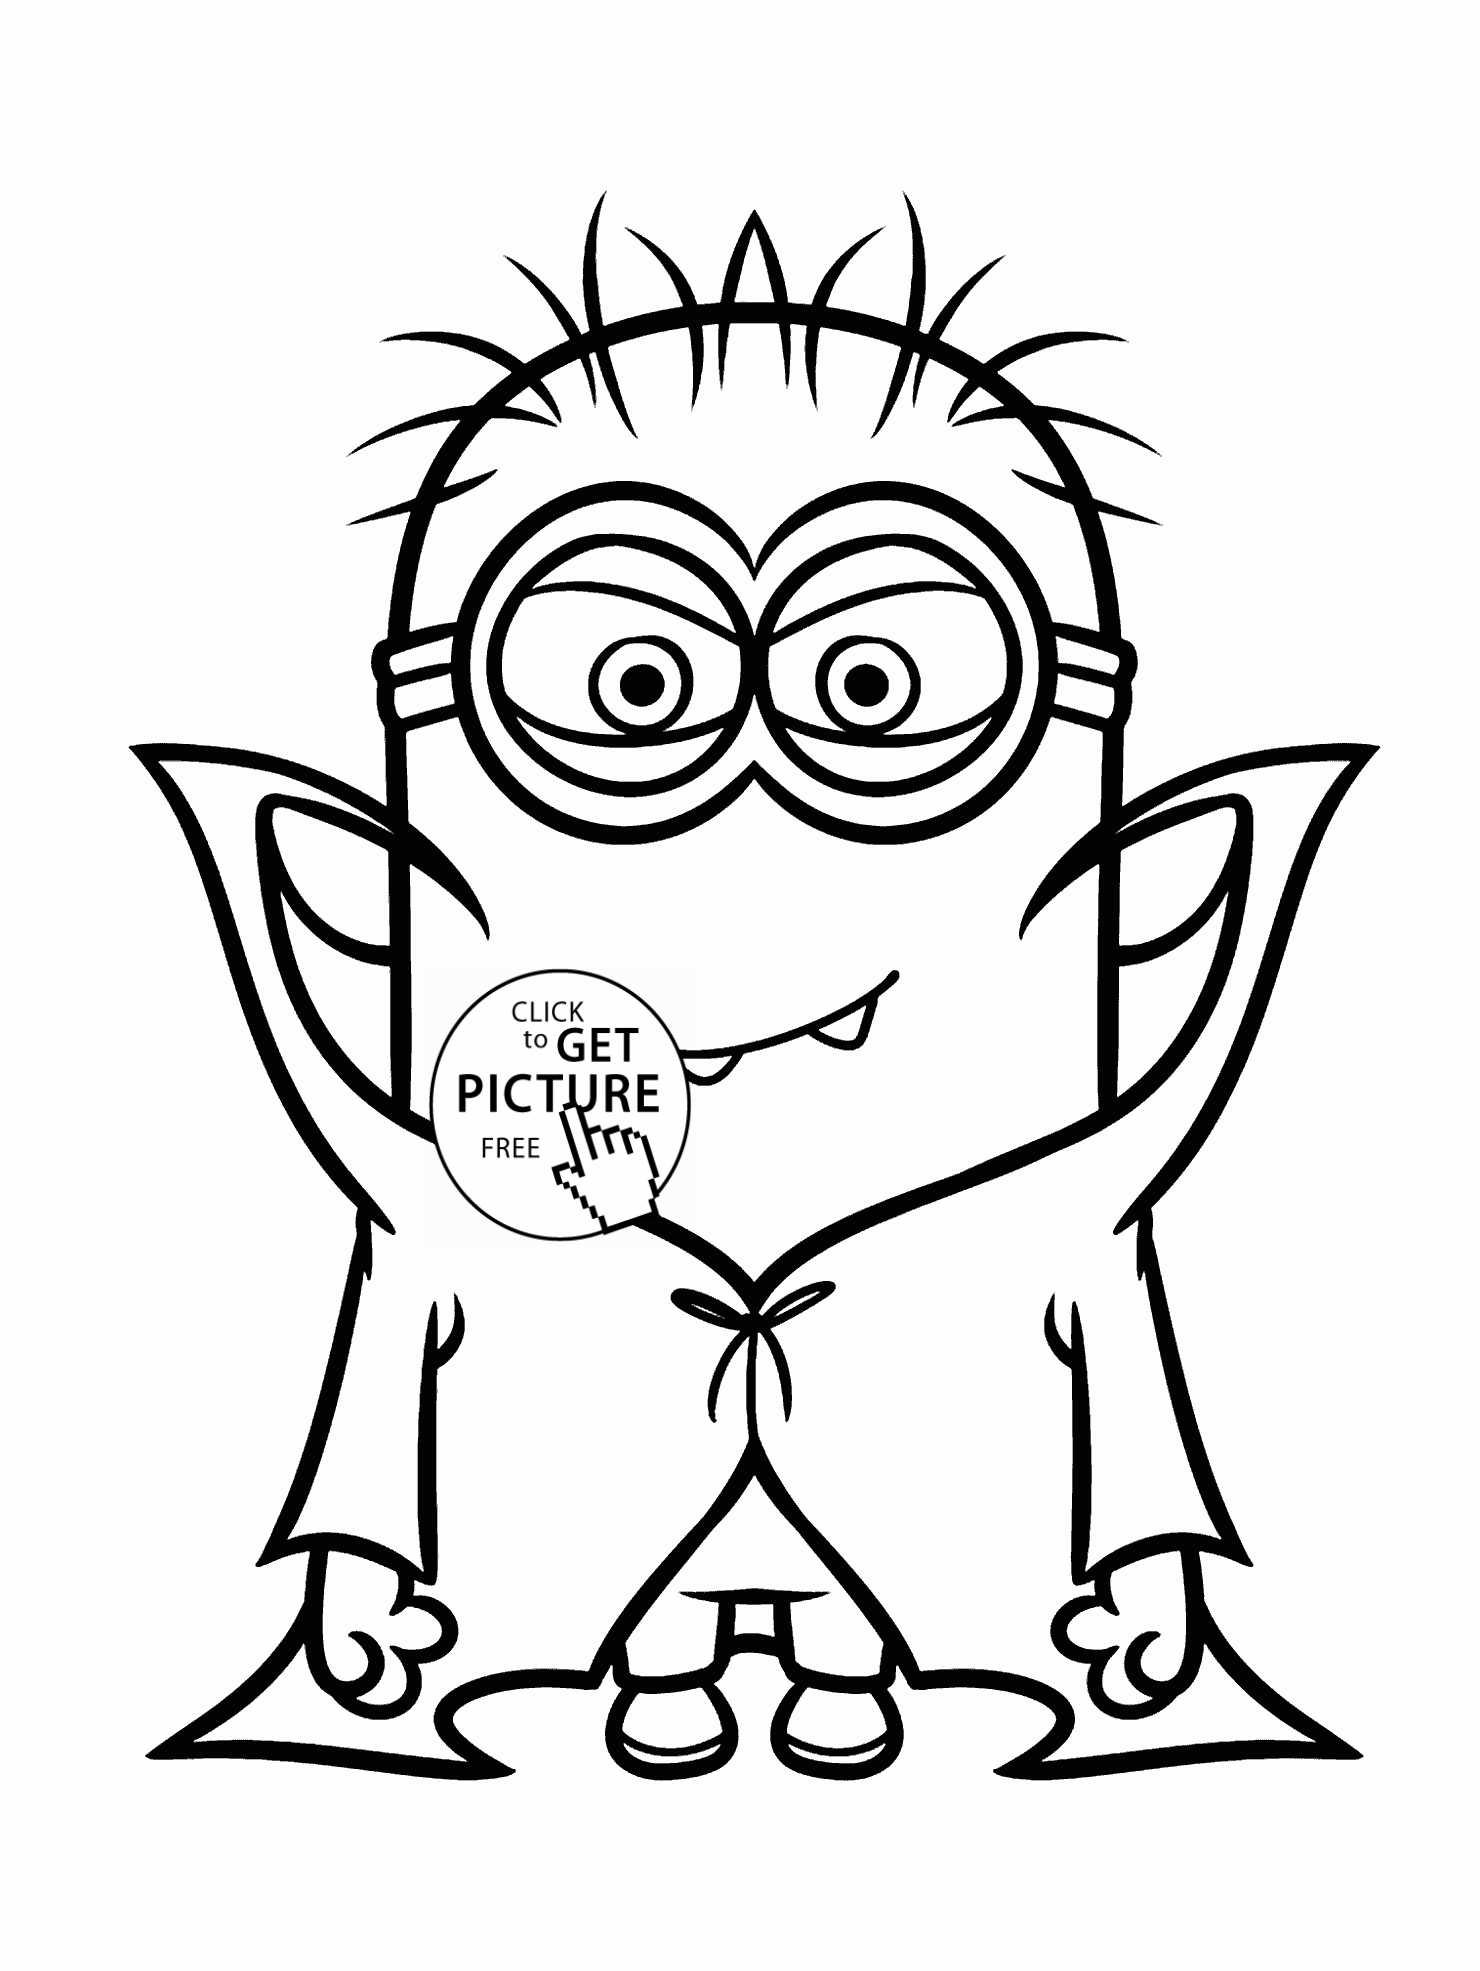 Minion vampire coloring pages for kids halloween printables free